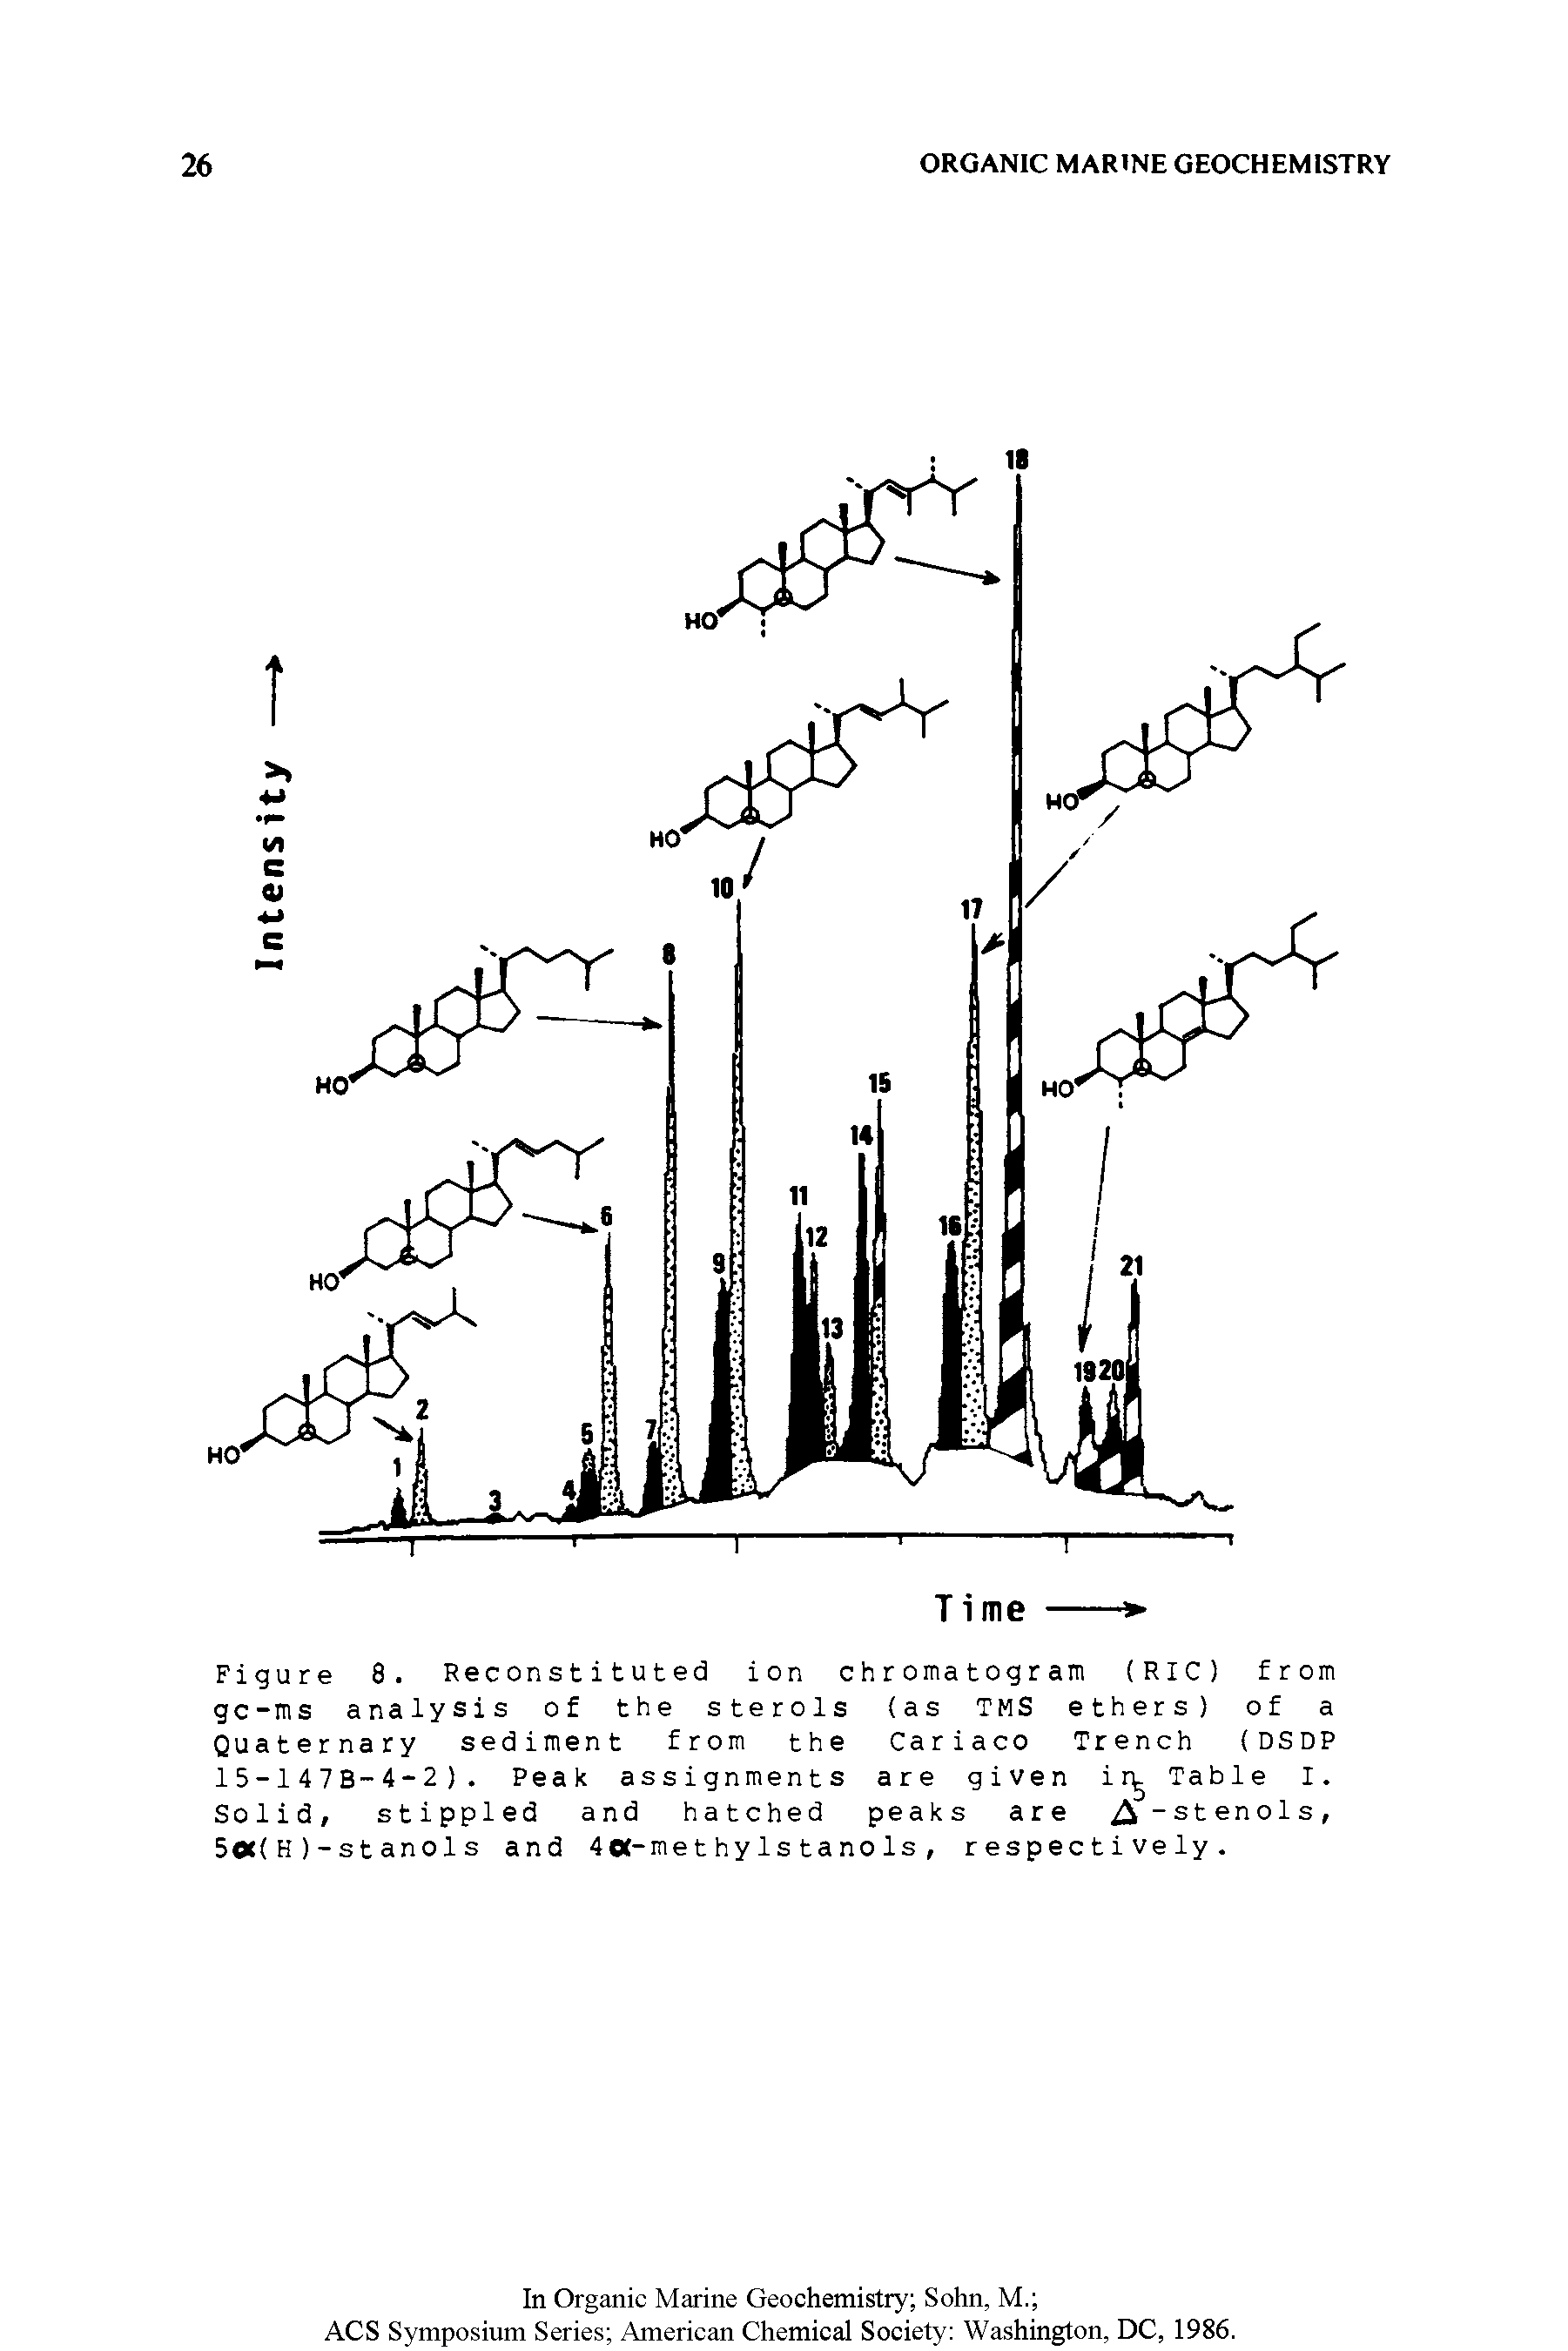 Figure 8. Reconstituted ion chromatogram (RIC) from gc-ms analysis of the sterols (as TMS ethers) of a Quaternary sediment from the Cariaco Trench (DSDP 15-147B-4-2). Peak assignments are given i Table I. Solid, stippled and hatched peaks are 2i Stenols, 5o<(H)-stanols and 4o<-methylstanols, respectively.